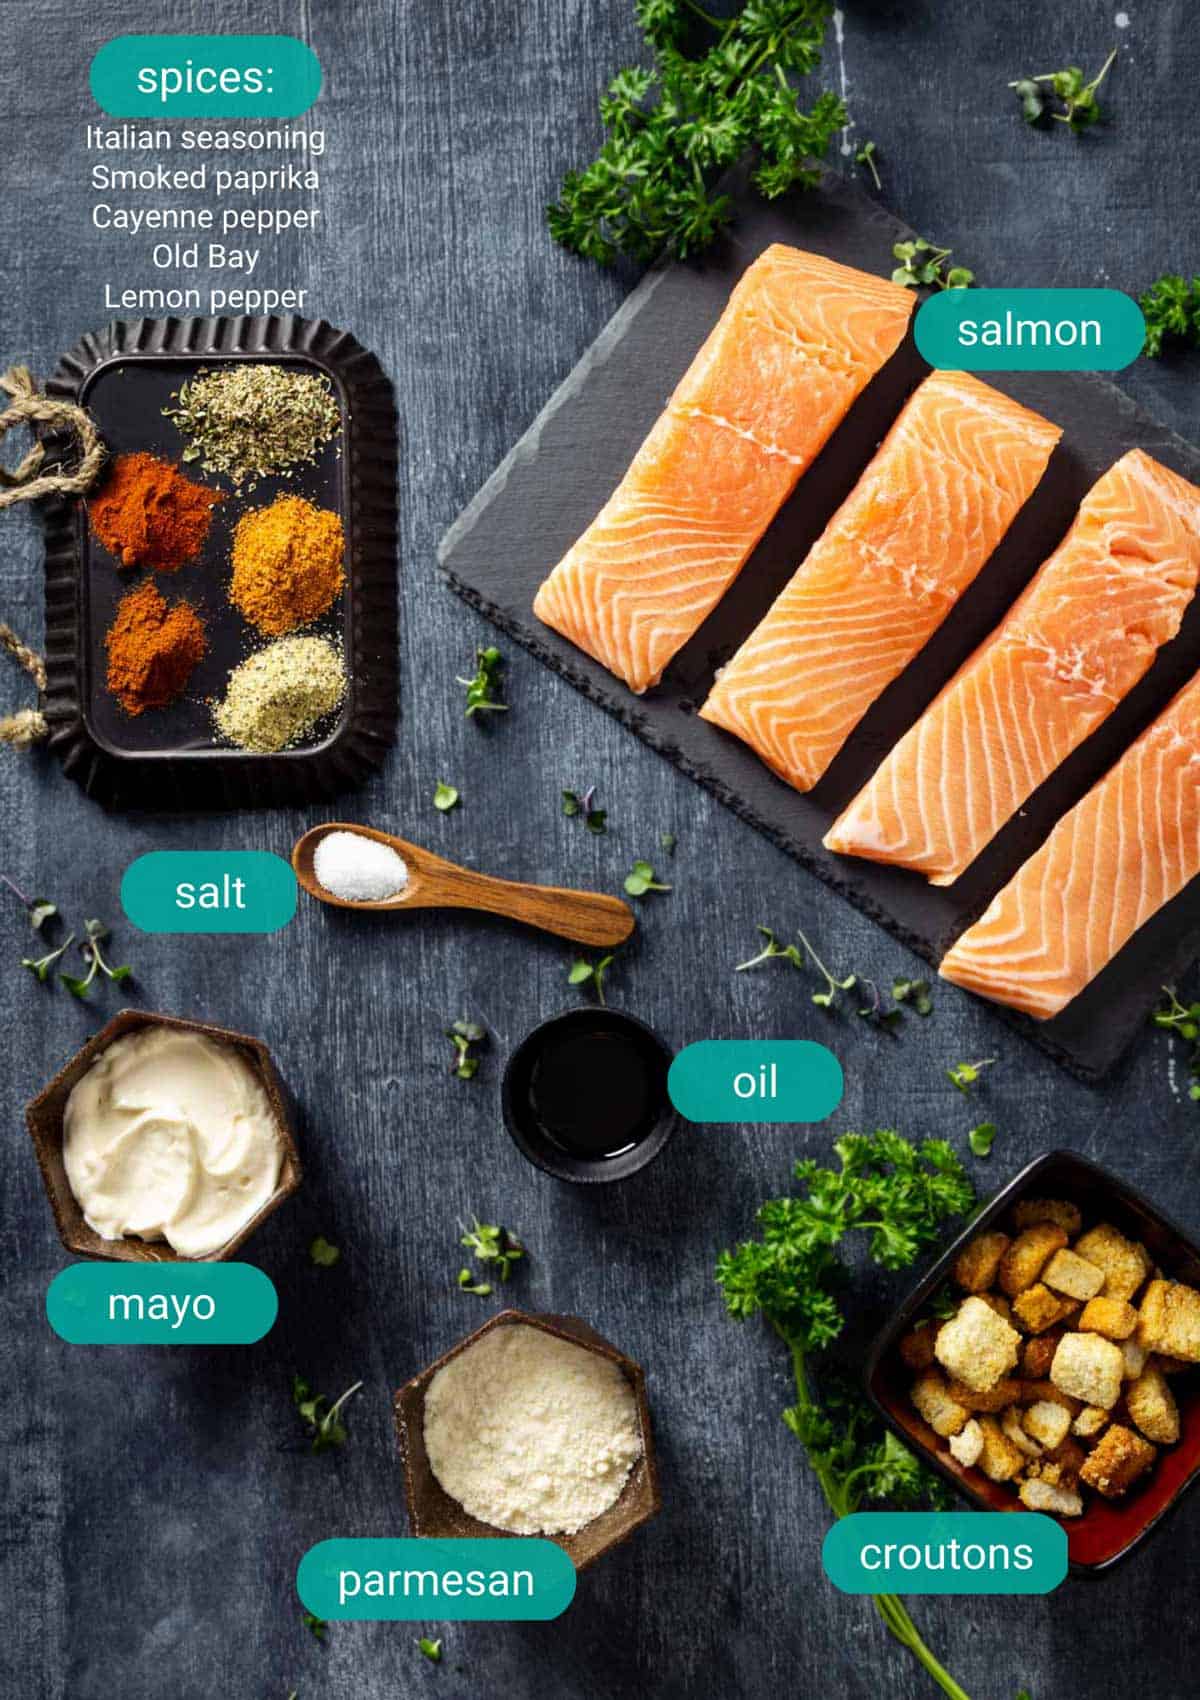 Ingredients for crusted salmon with parmesan cheese, Italian croutons, and herbs.